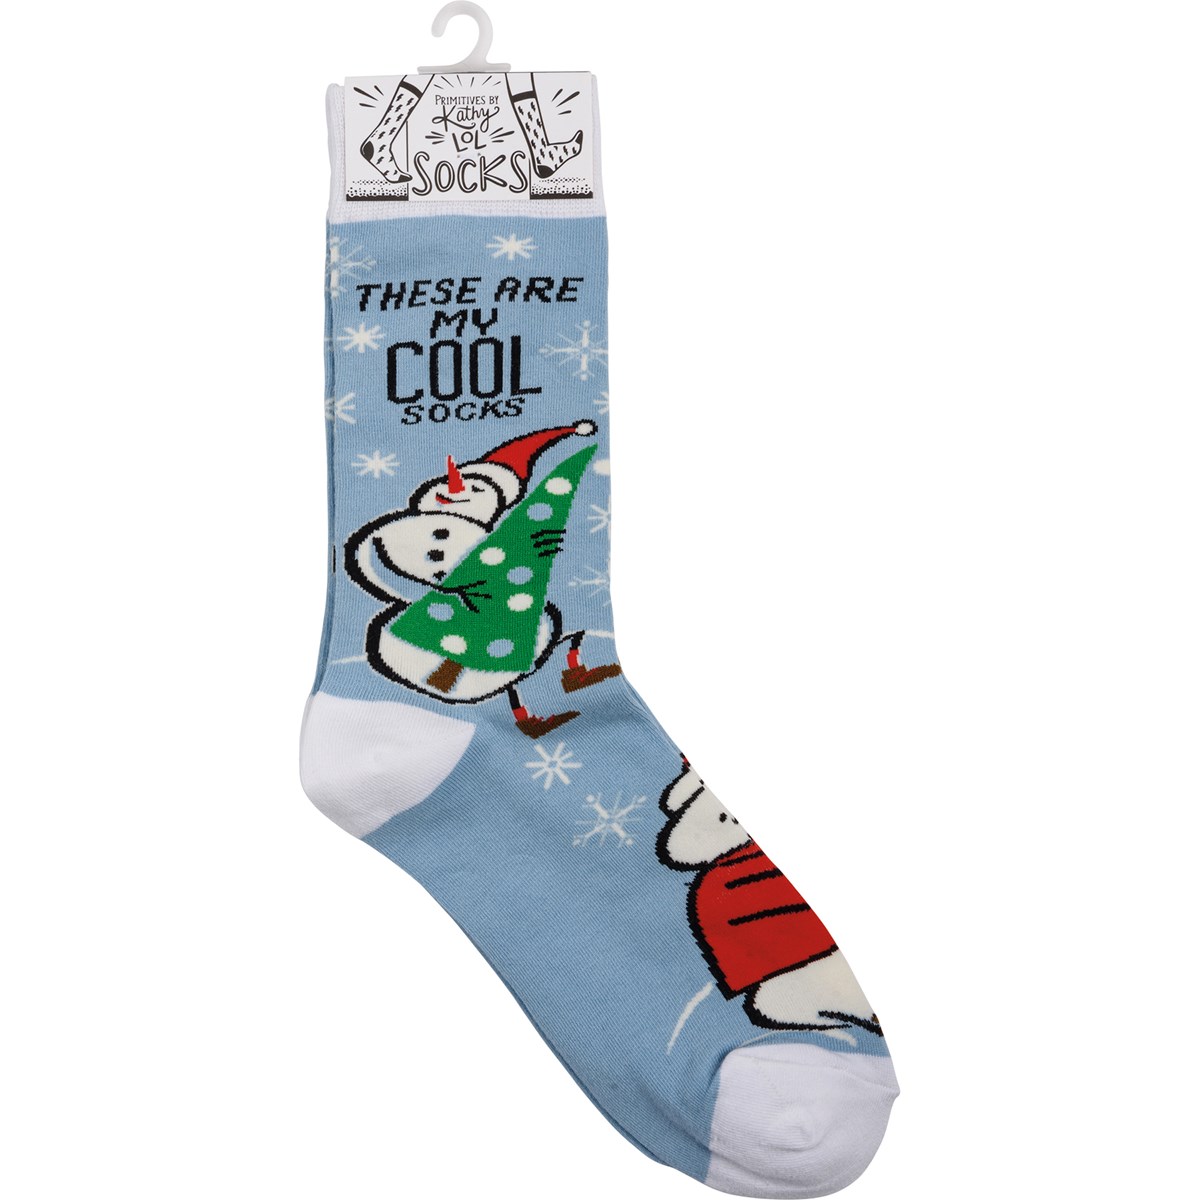 Socks - These Are My Cool Socks - One Size Fits Most - Cotton, Nylon, Spandex